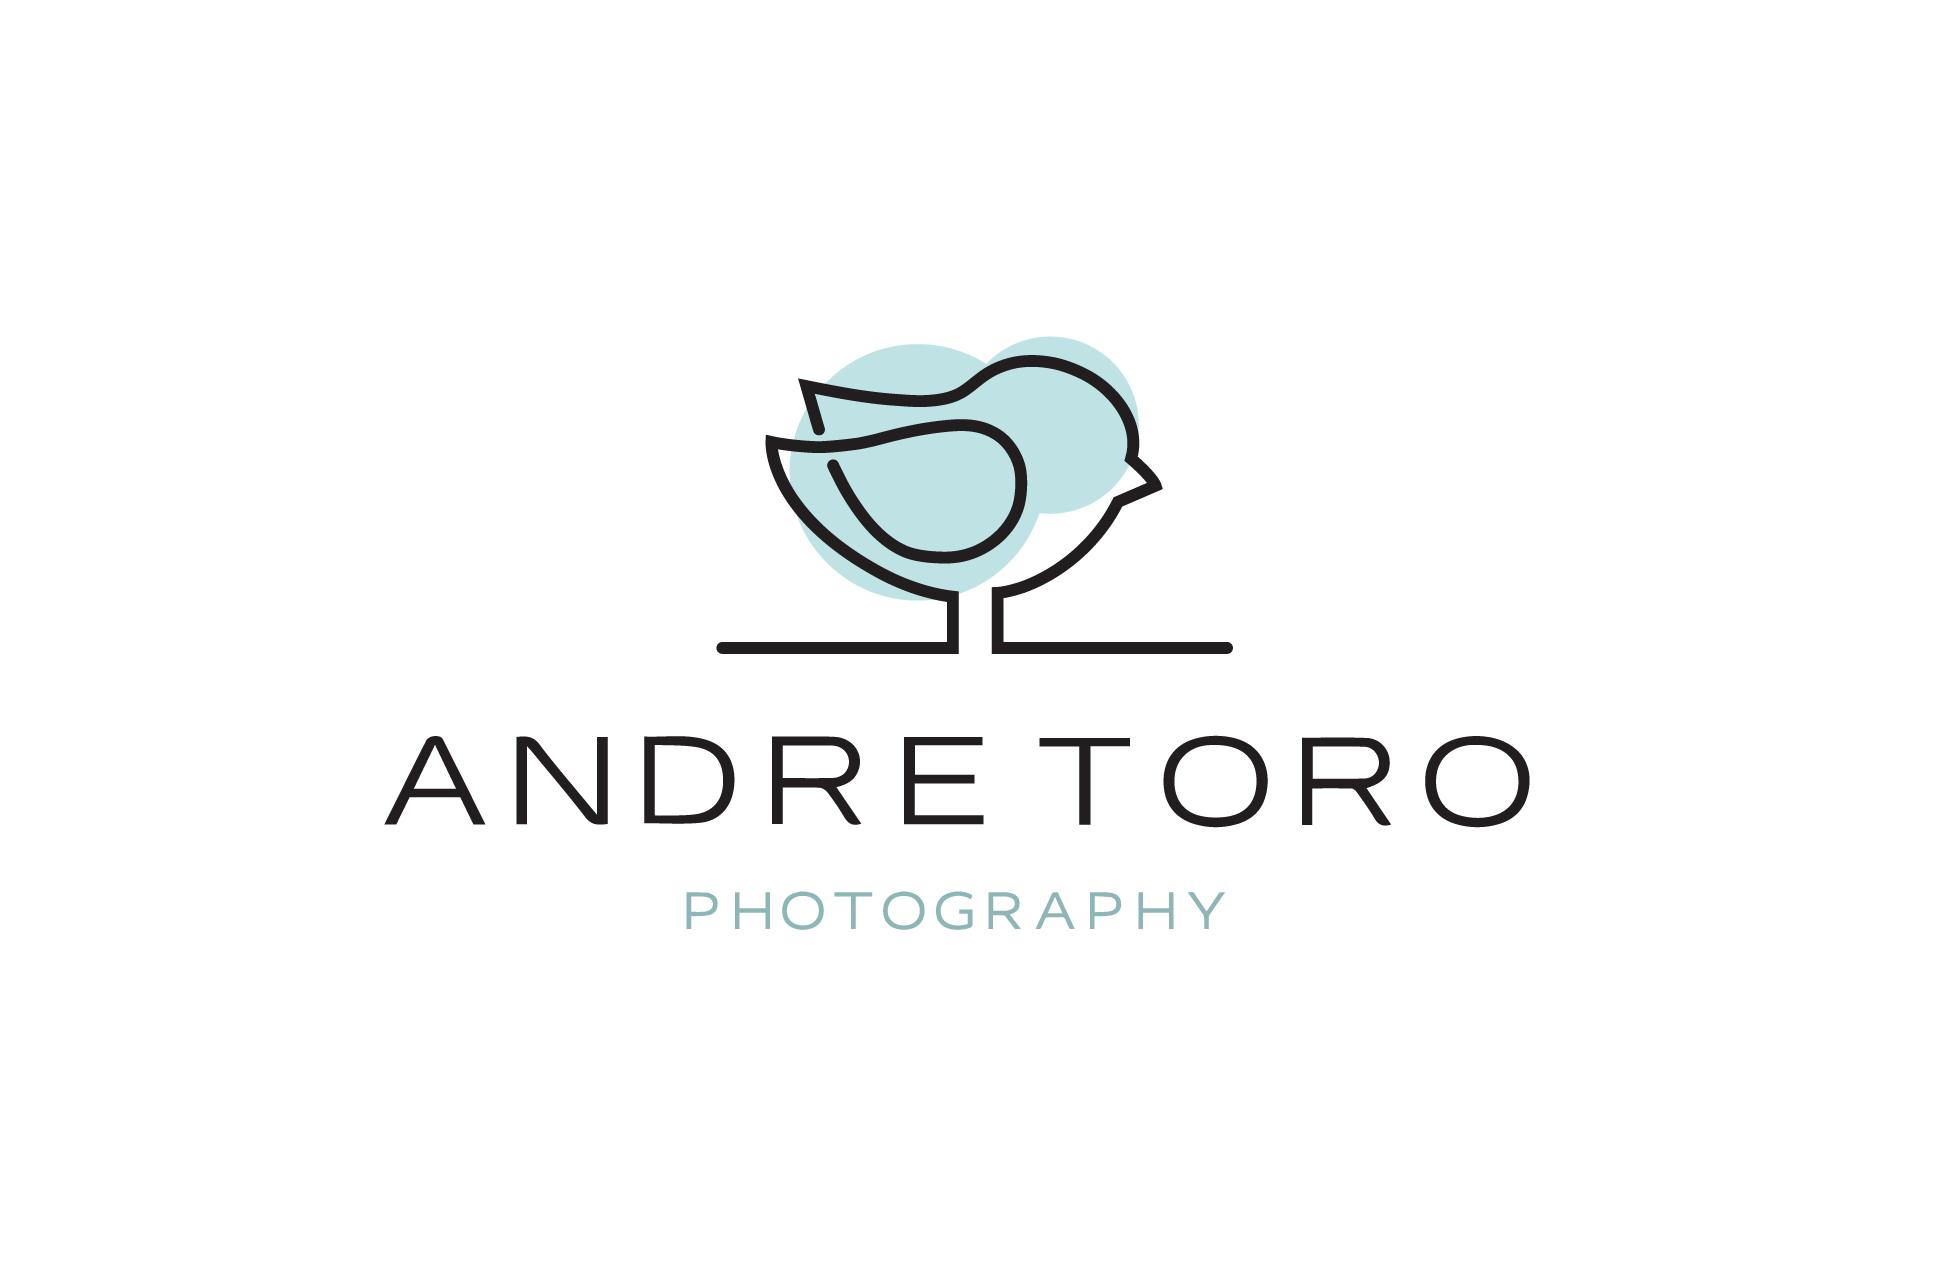 Andre Toro Photography logo.png